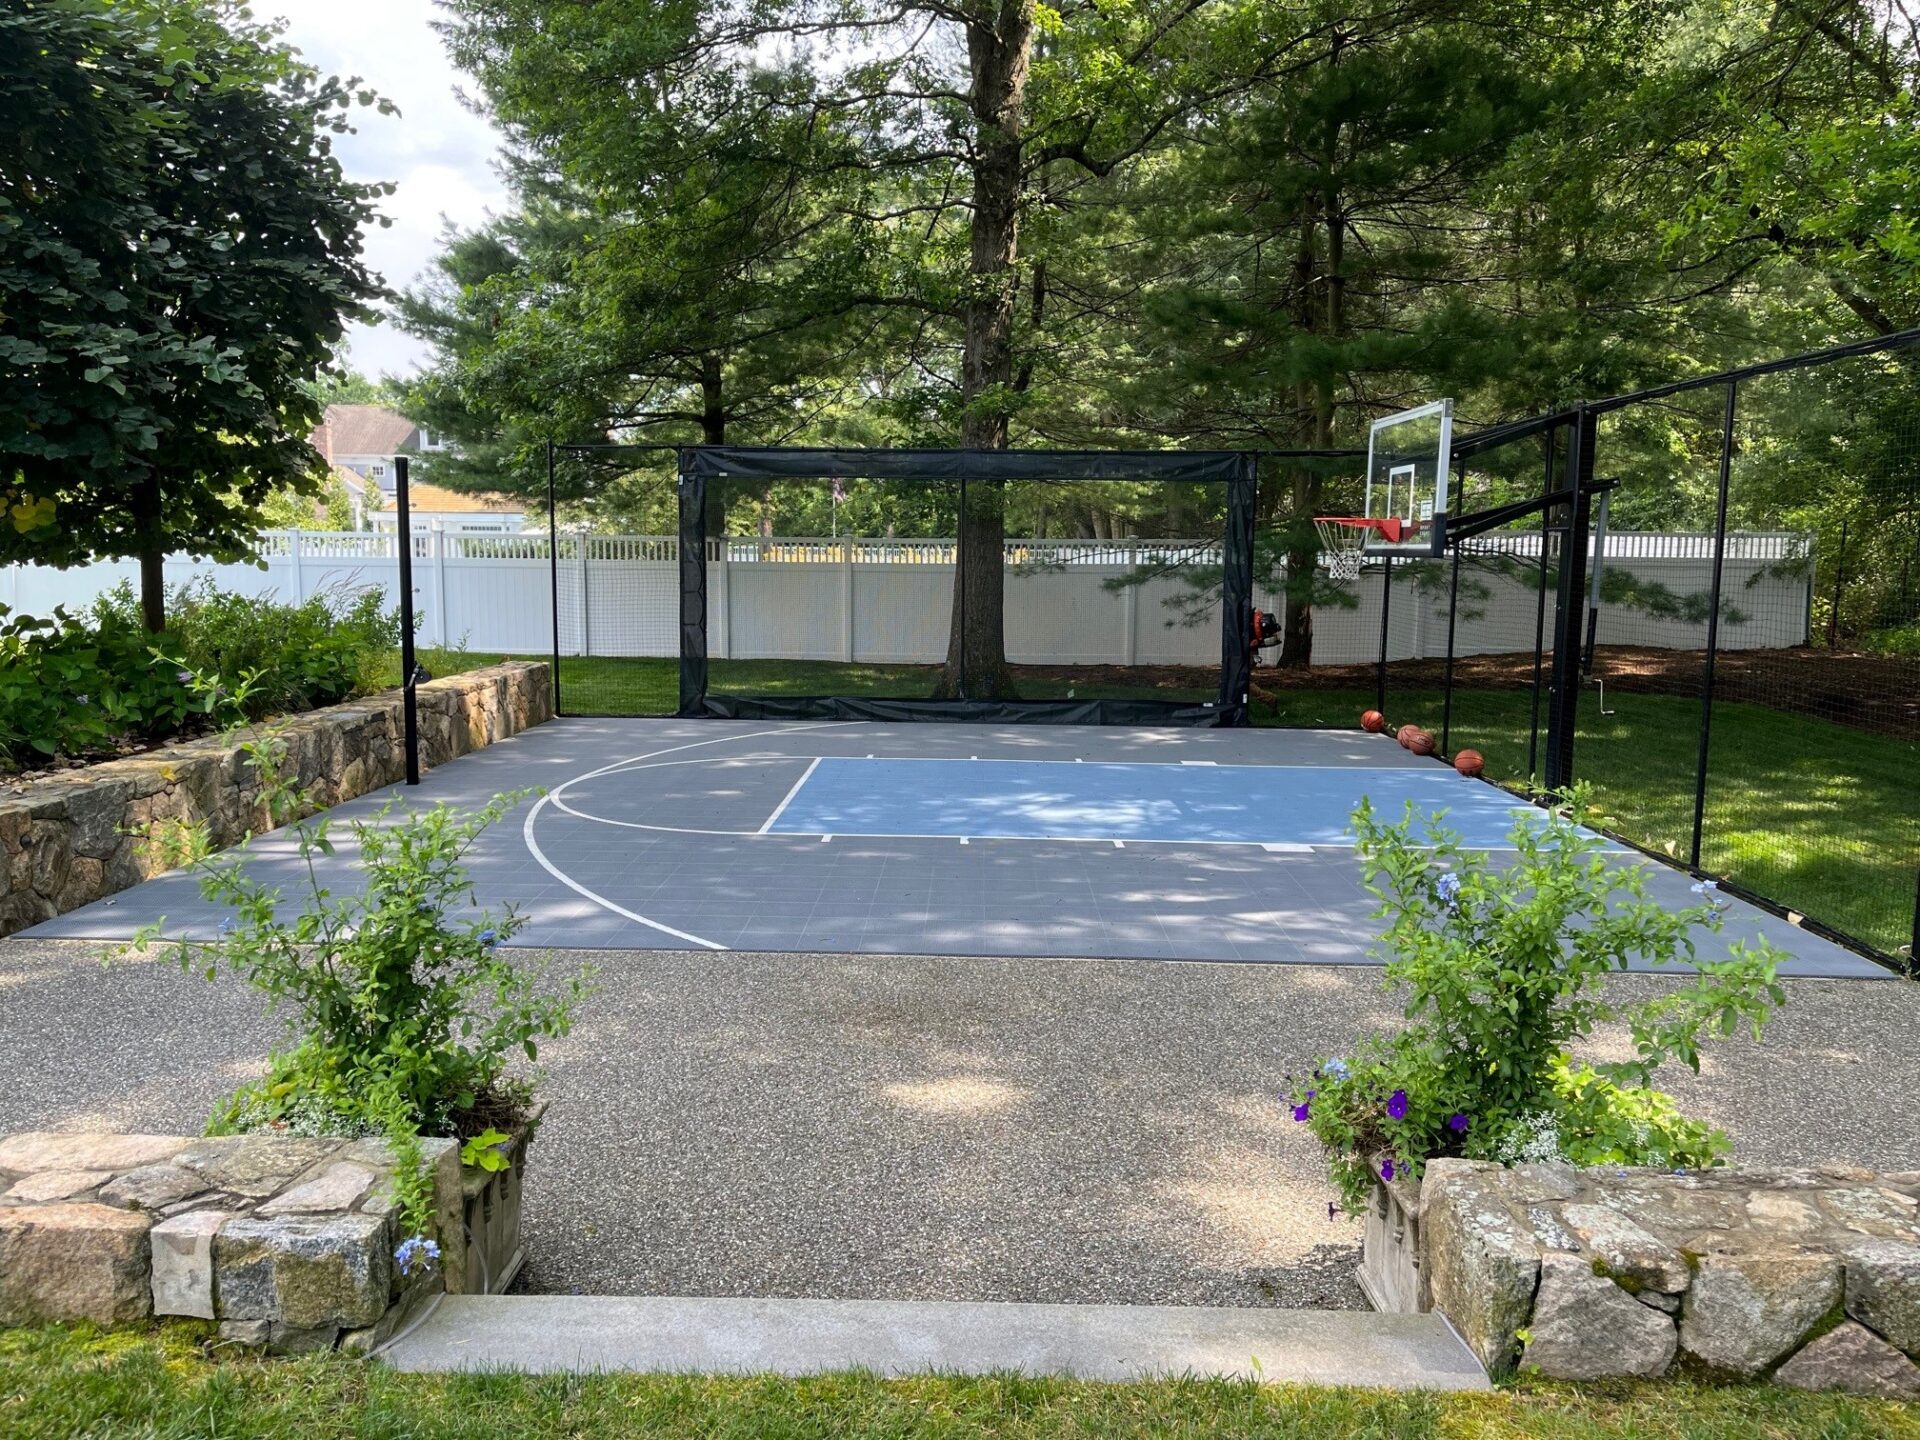 A private outdoor basketball court with fencing and a hoop, surrounded by trees, shrubs, and a white fence under a clear sky.